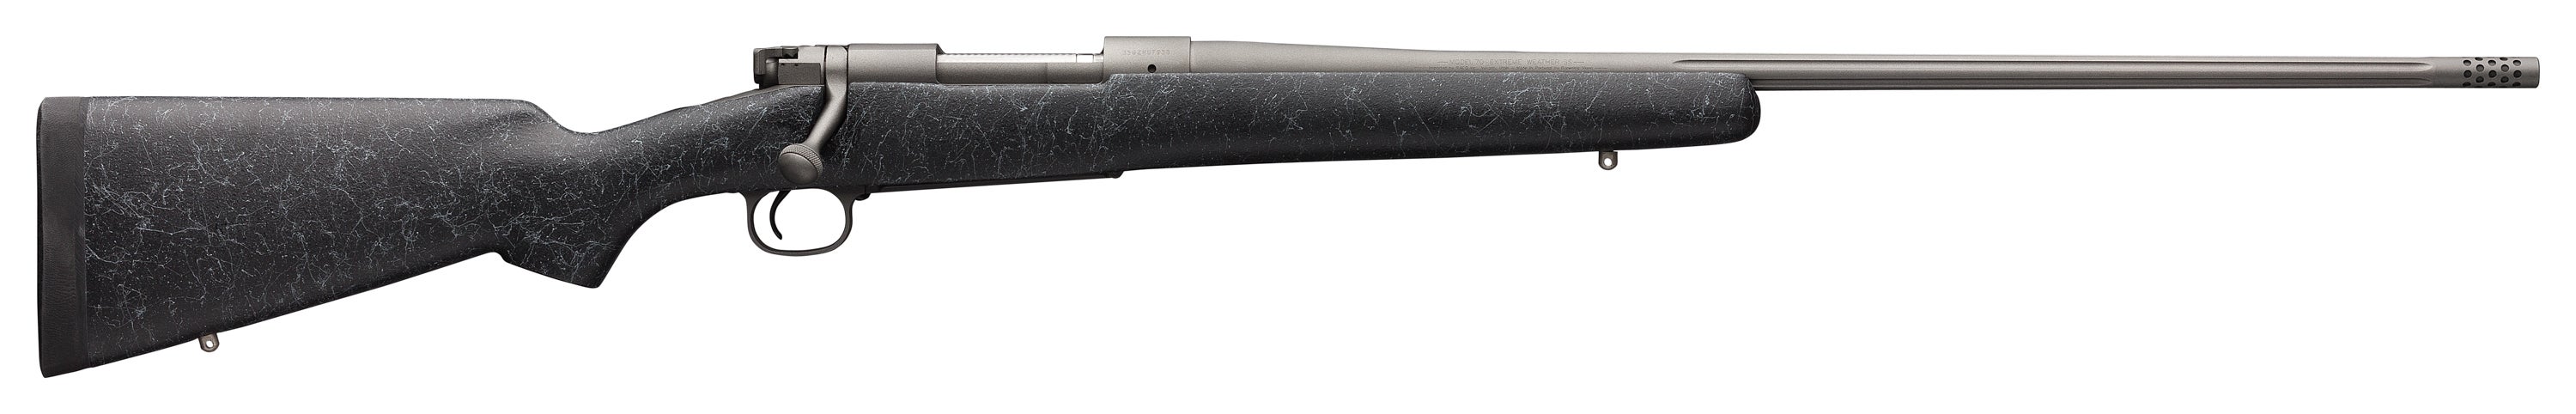 Model 70 Extreme Tungsten Bolt Action Rifle Winchester